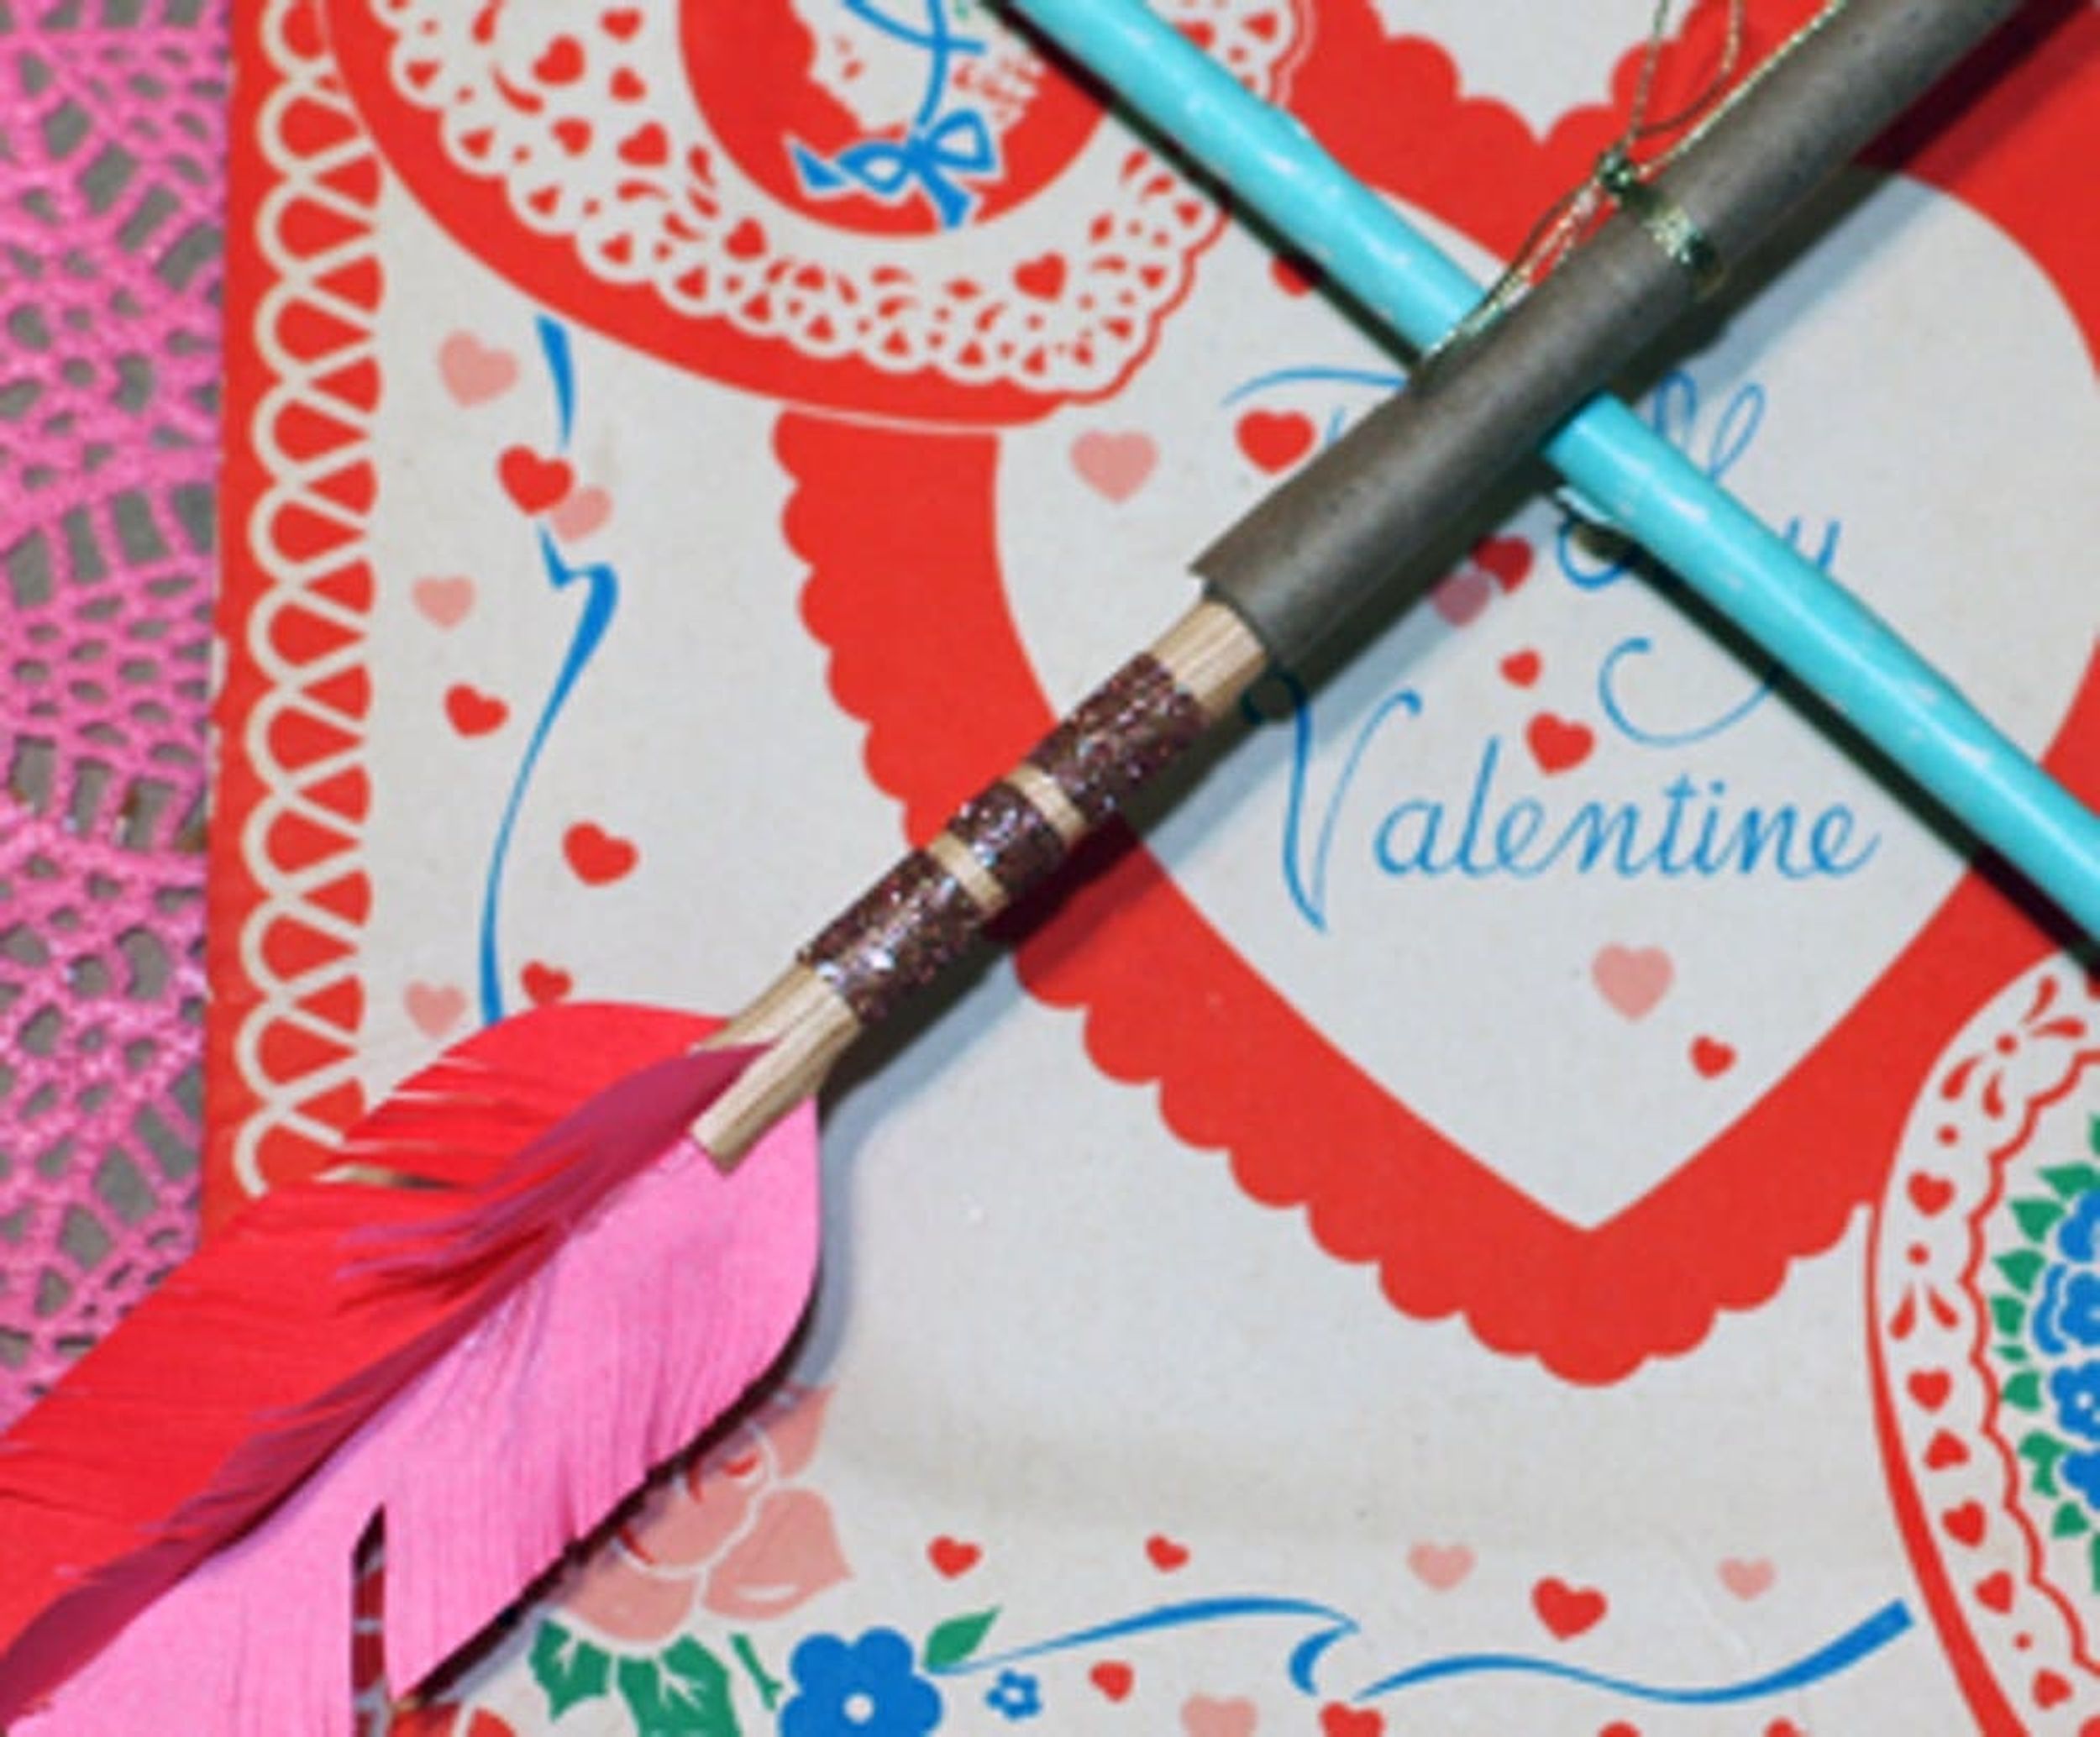 Make Your Own Cupid’s Arrow Using Paper, Tape, and a Straw